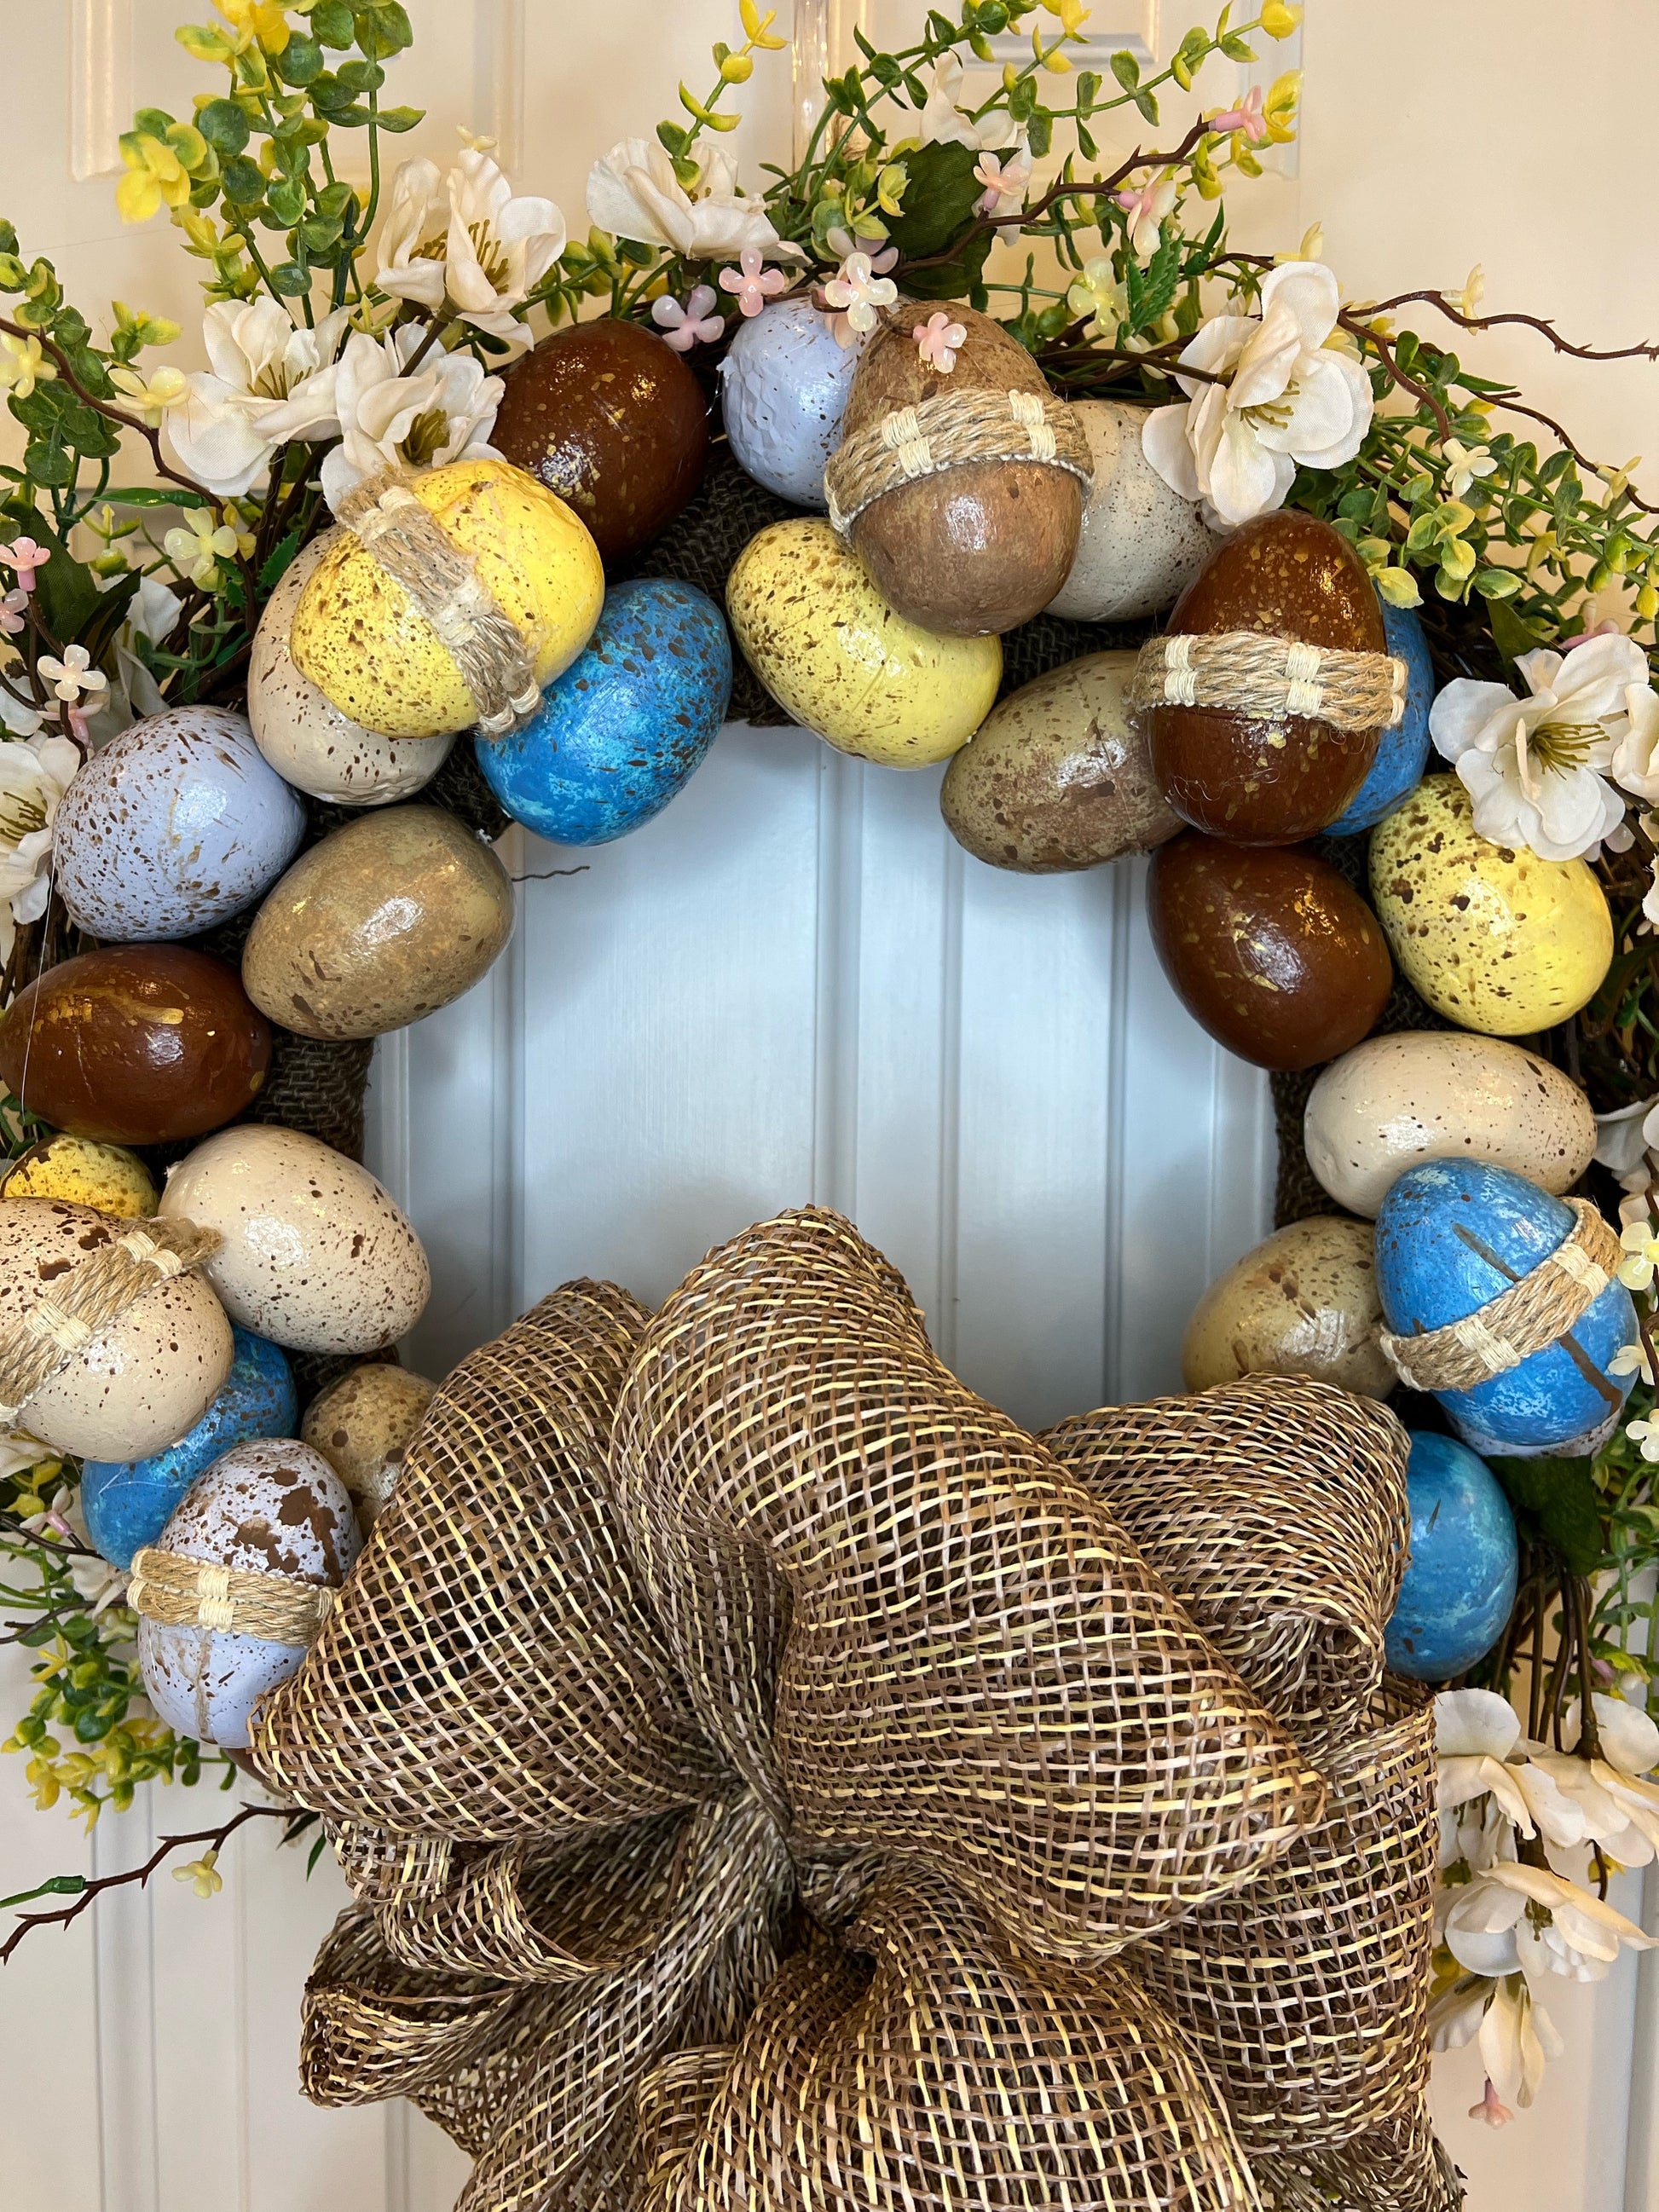 Row of easter eggs with decorative flower wreaths